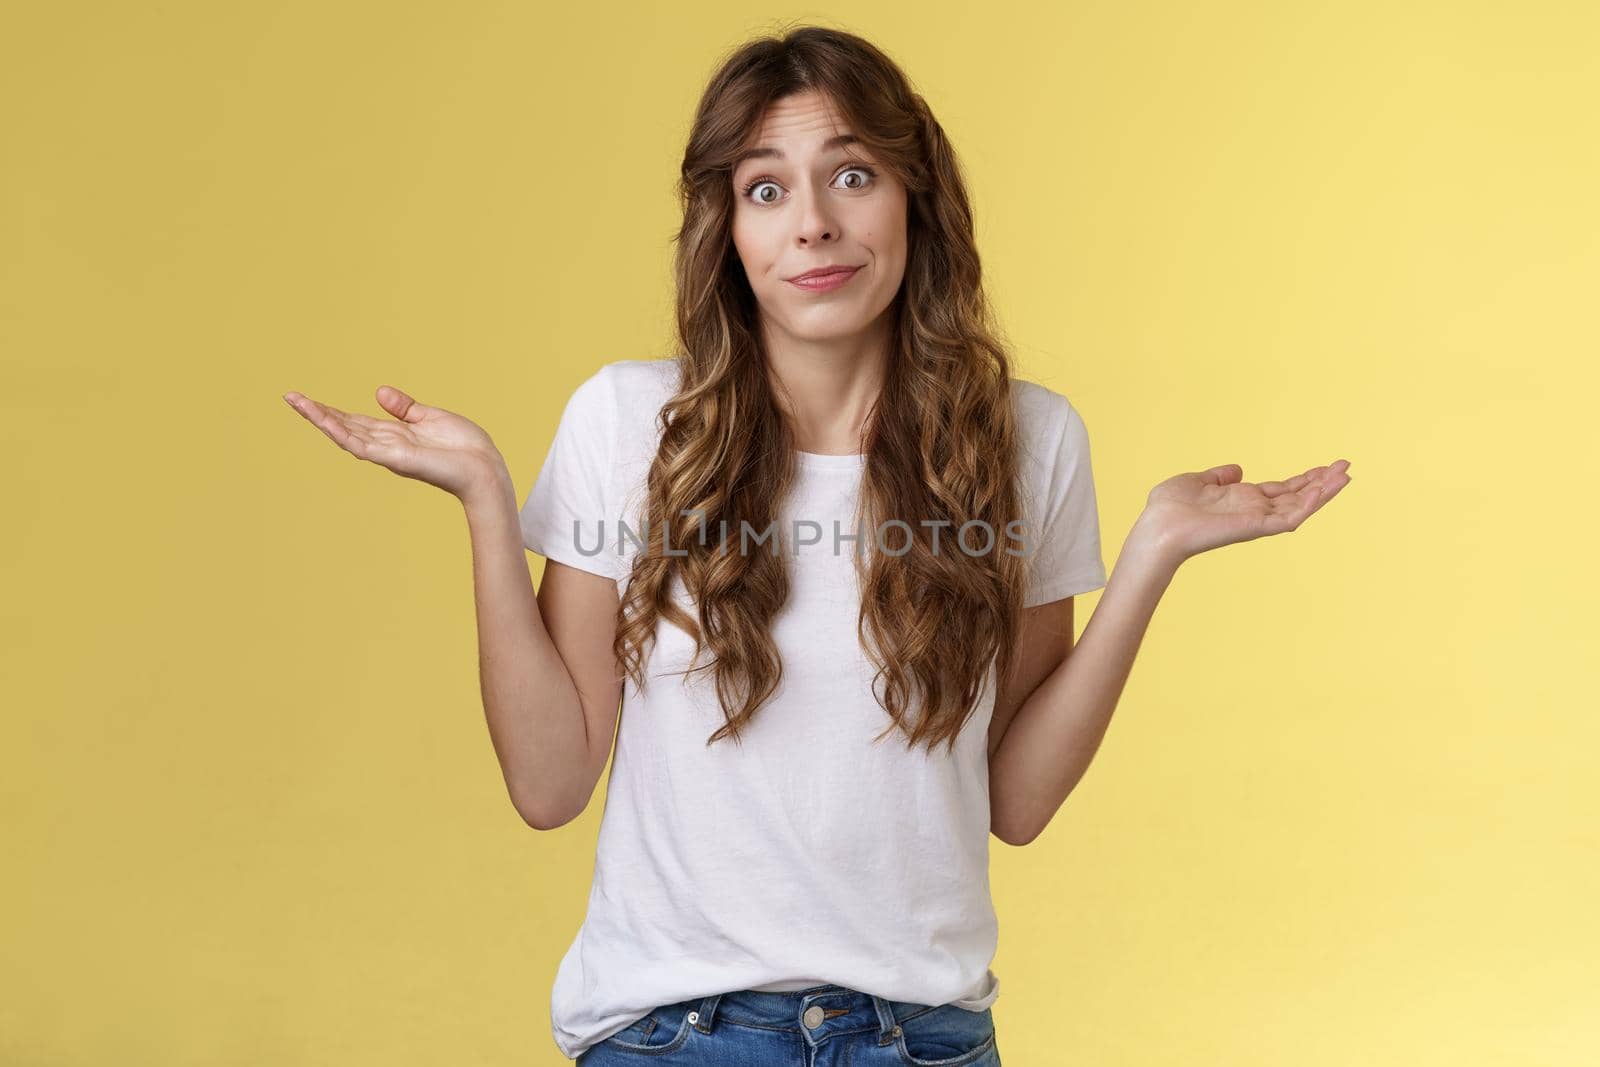 Sorry unable help. Clueless apathetic attractive female friend shrugging hands spread sideways full dibelief uncertain smirking unaware have no idea perplexed answer question yellow background.